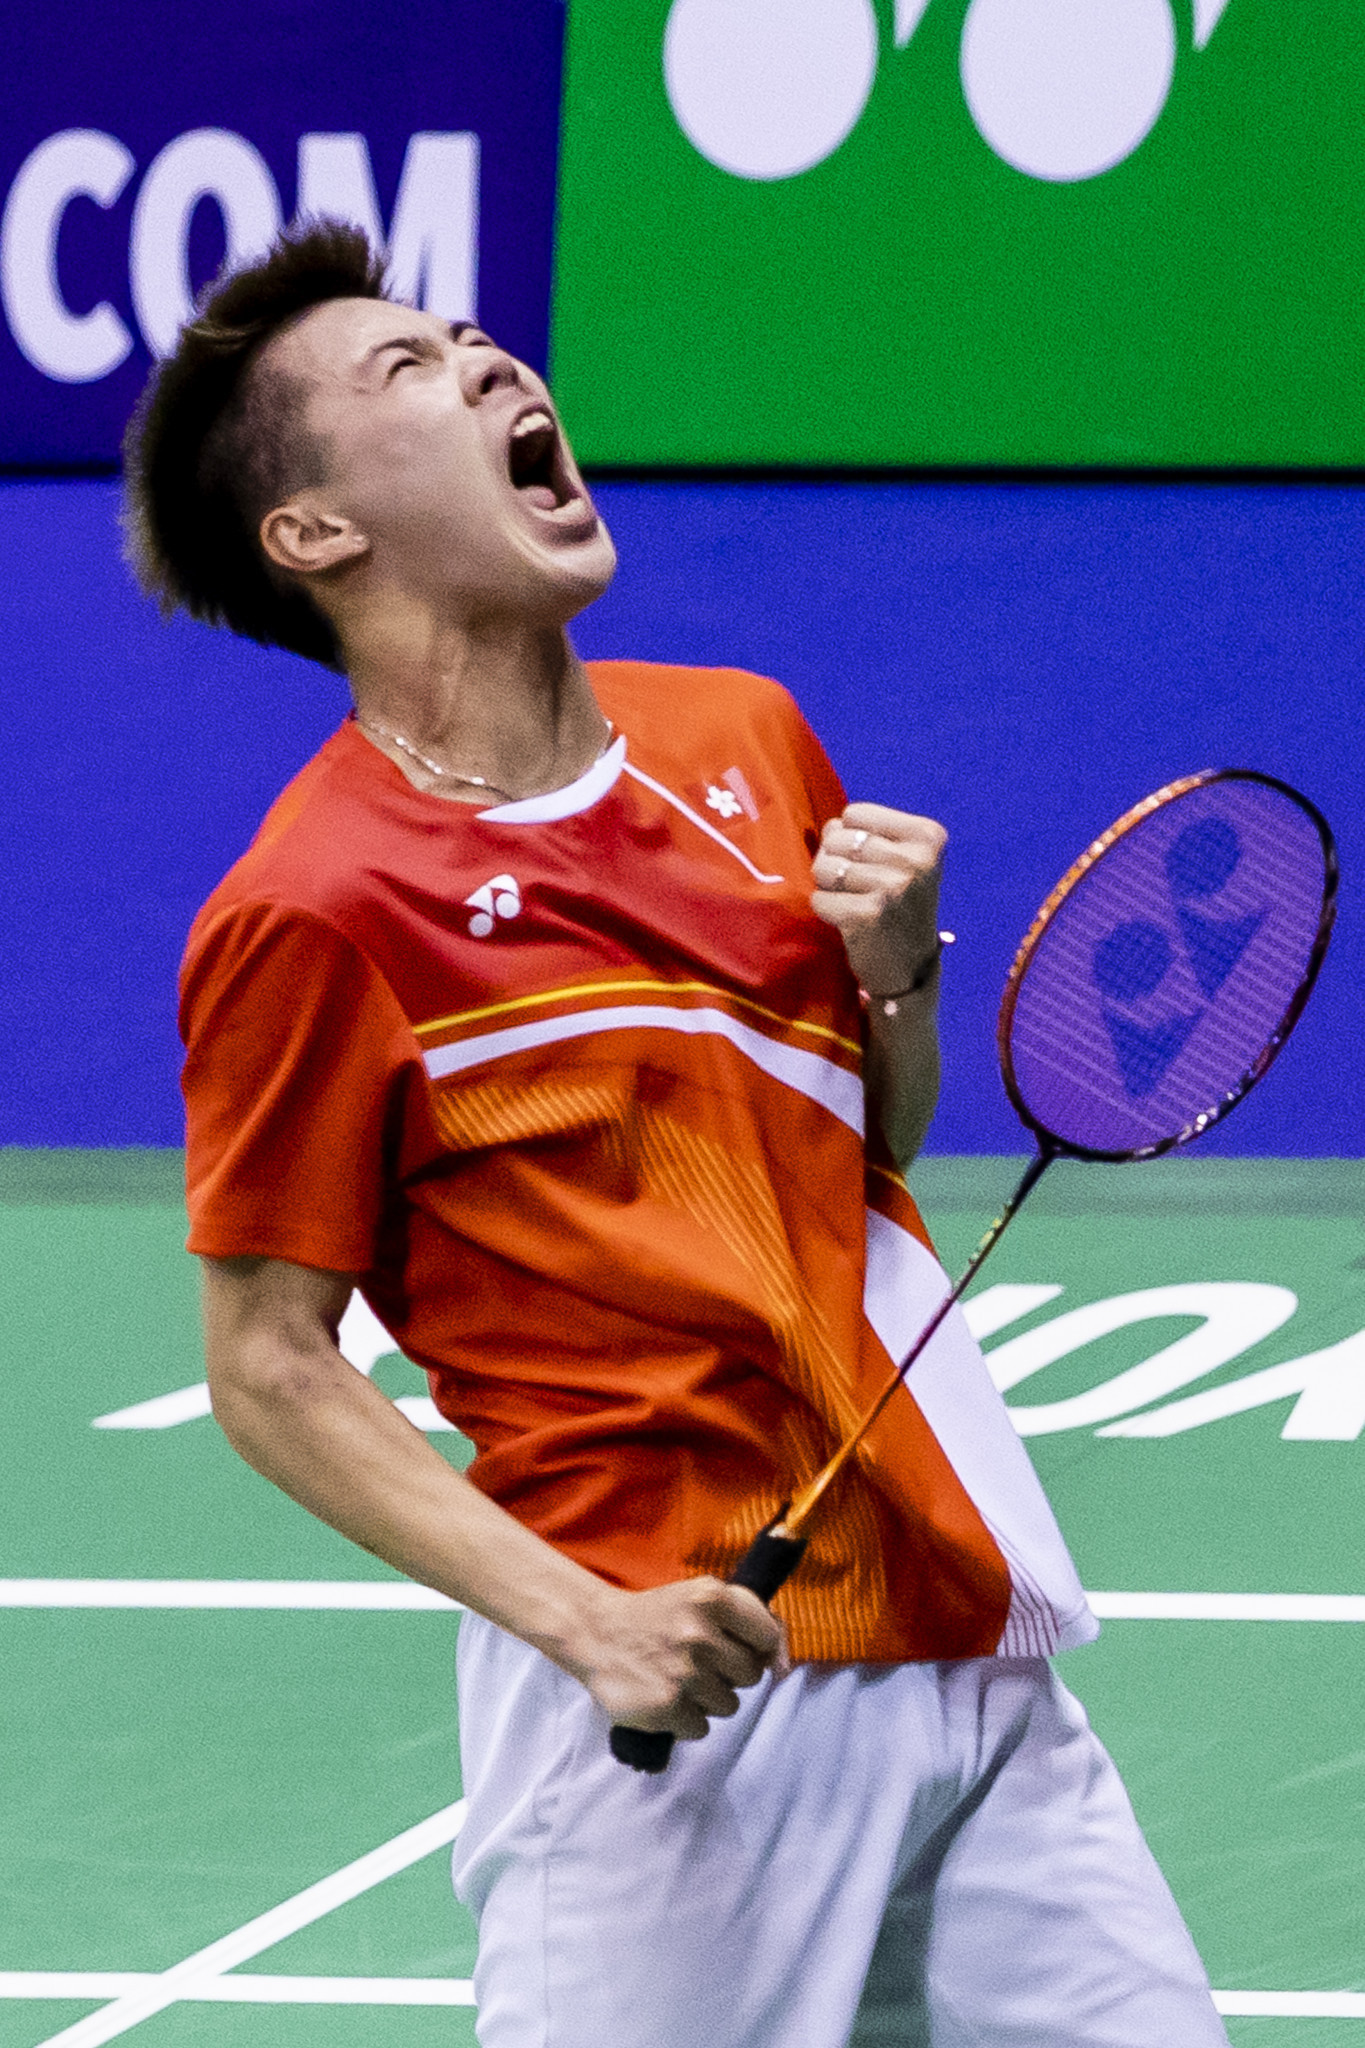 Lee Cheuk Yiu achieved a fairytale victory at the Badminton World Federation Hong Kong Open ©Getty Images